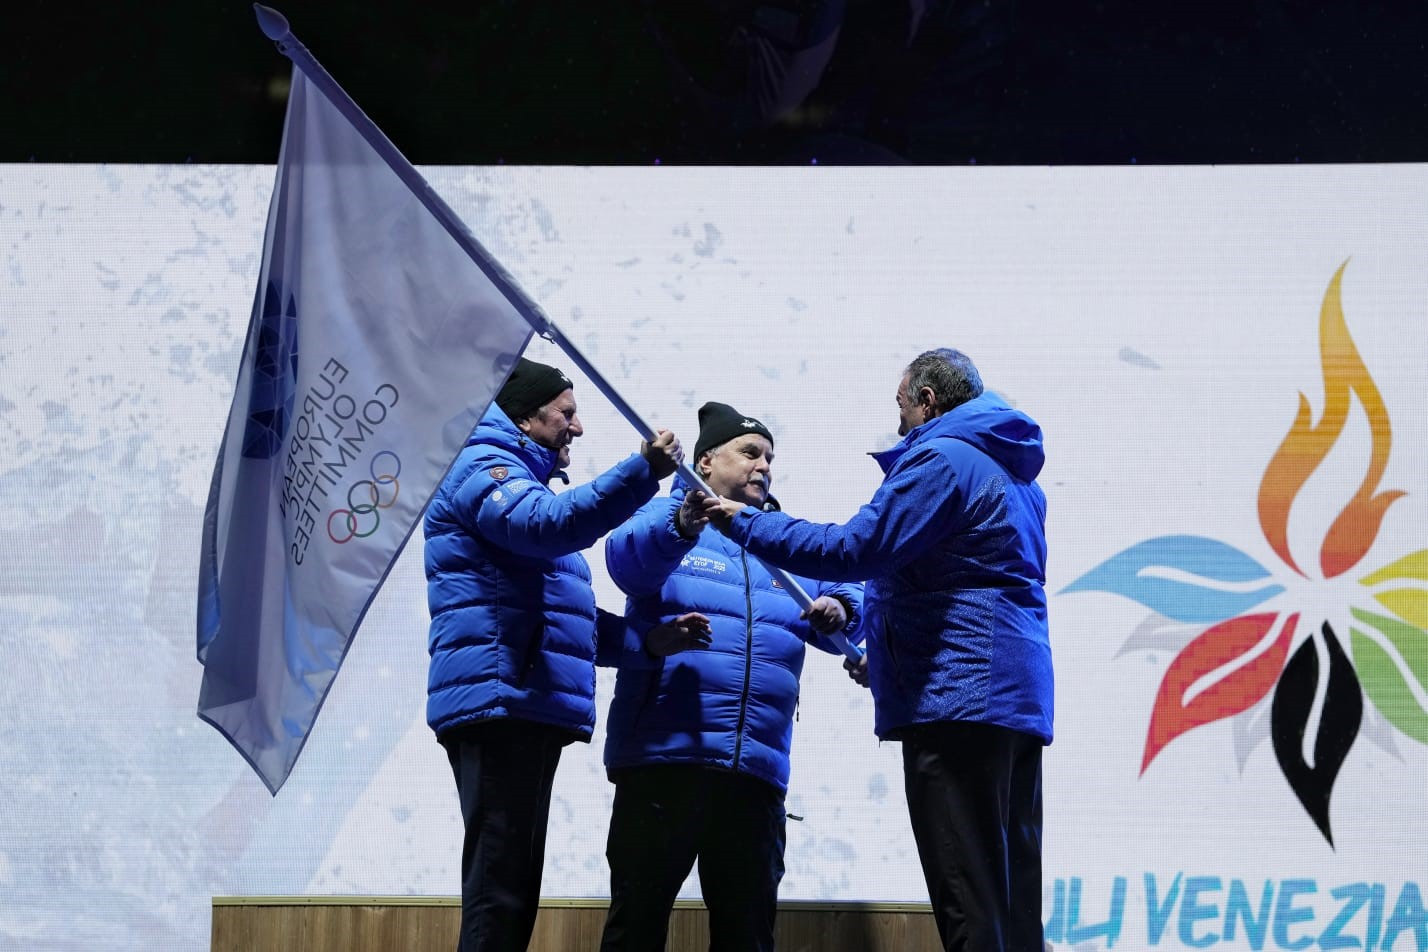 Final medals decided before Closing Ceremony on last day of Winter EYOF in Vuokatti